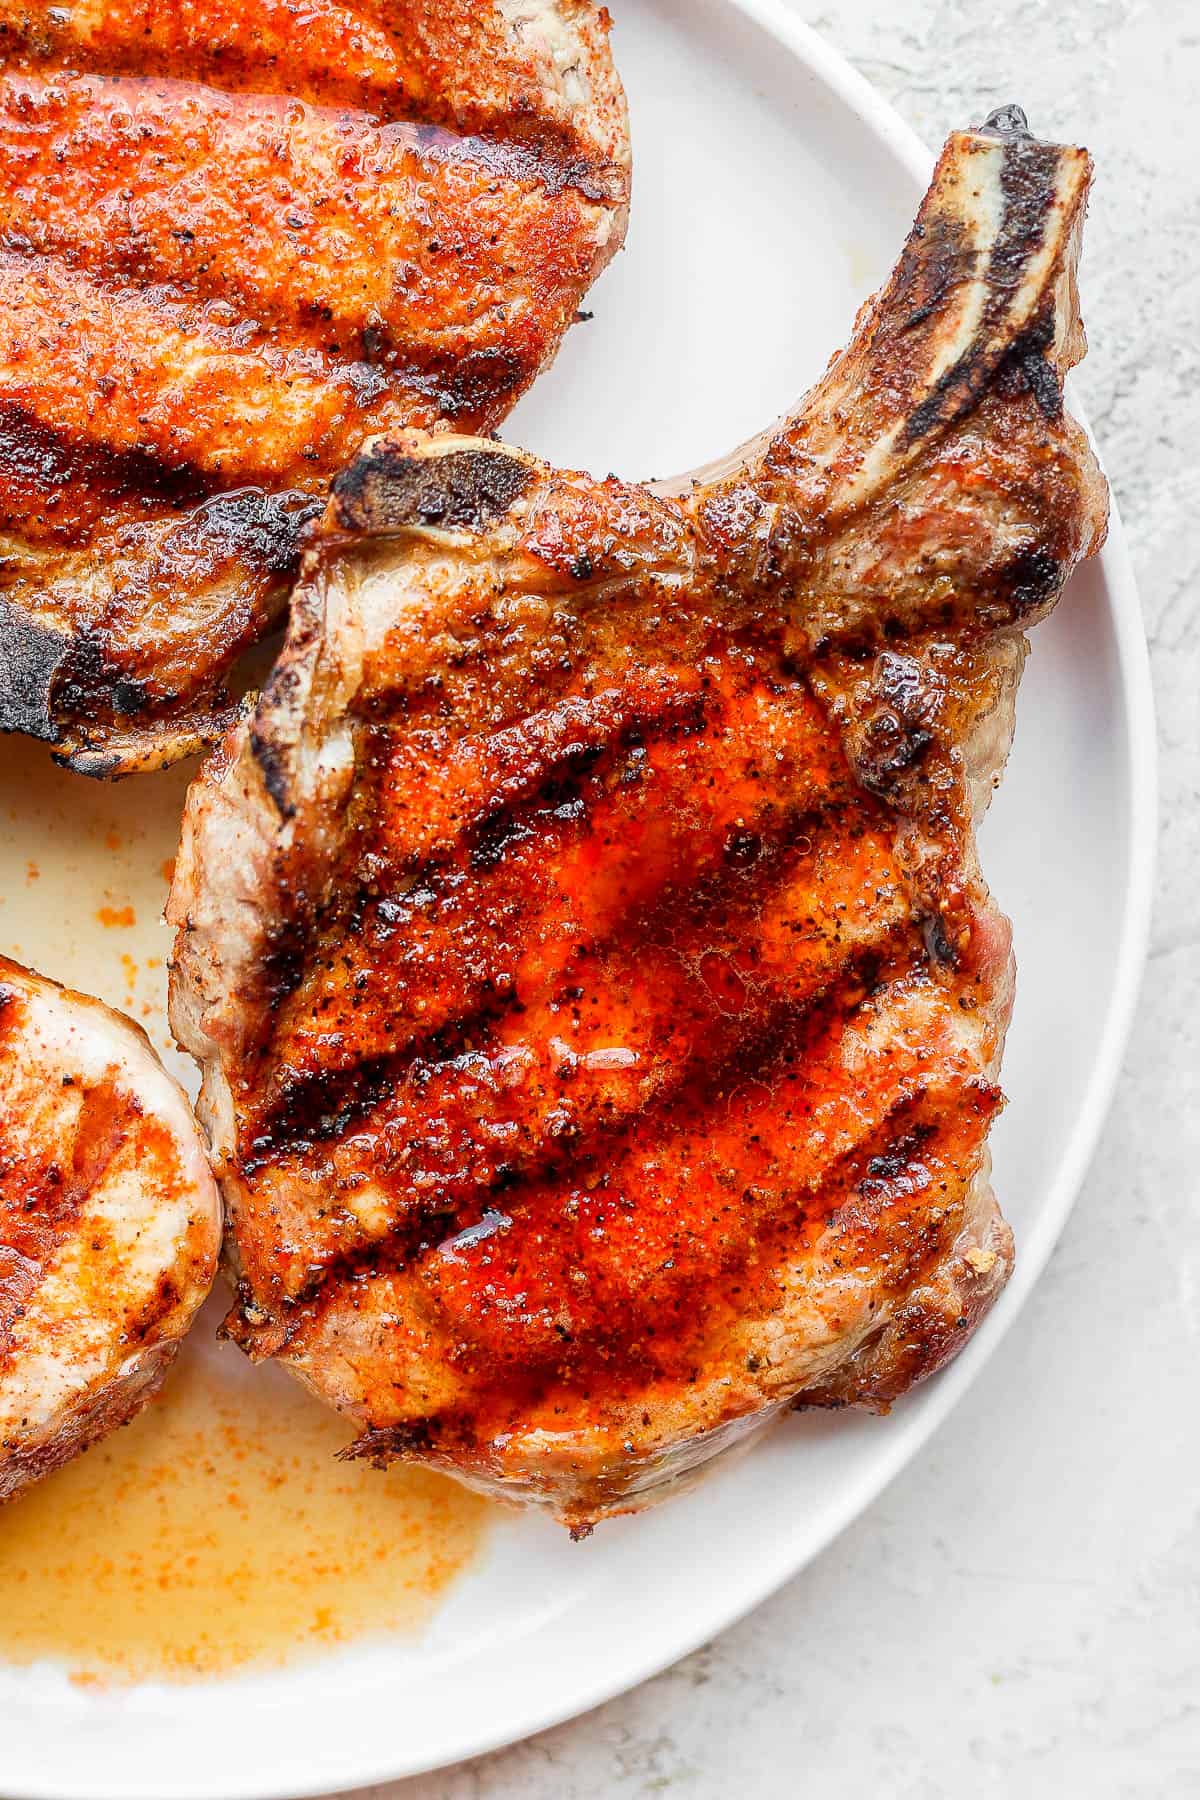 Seasoned pork chops on a plate after being grilled.